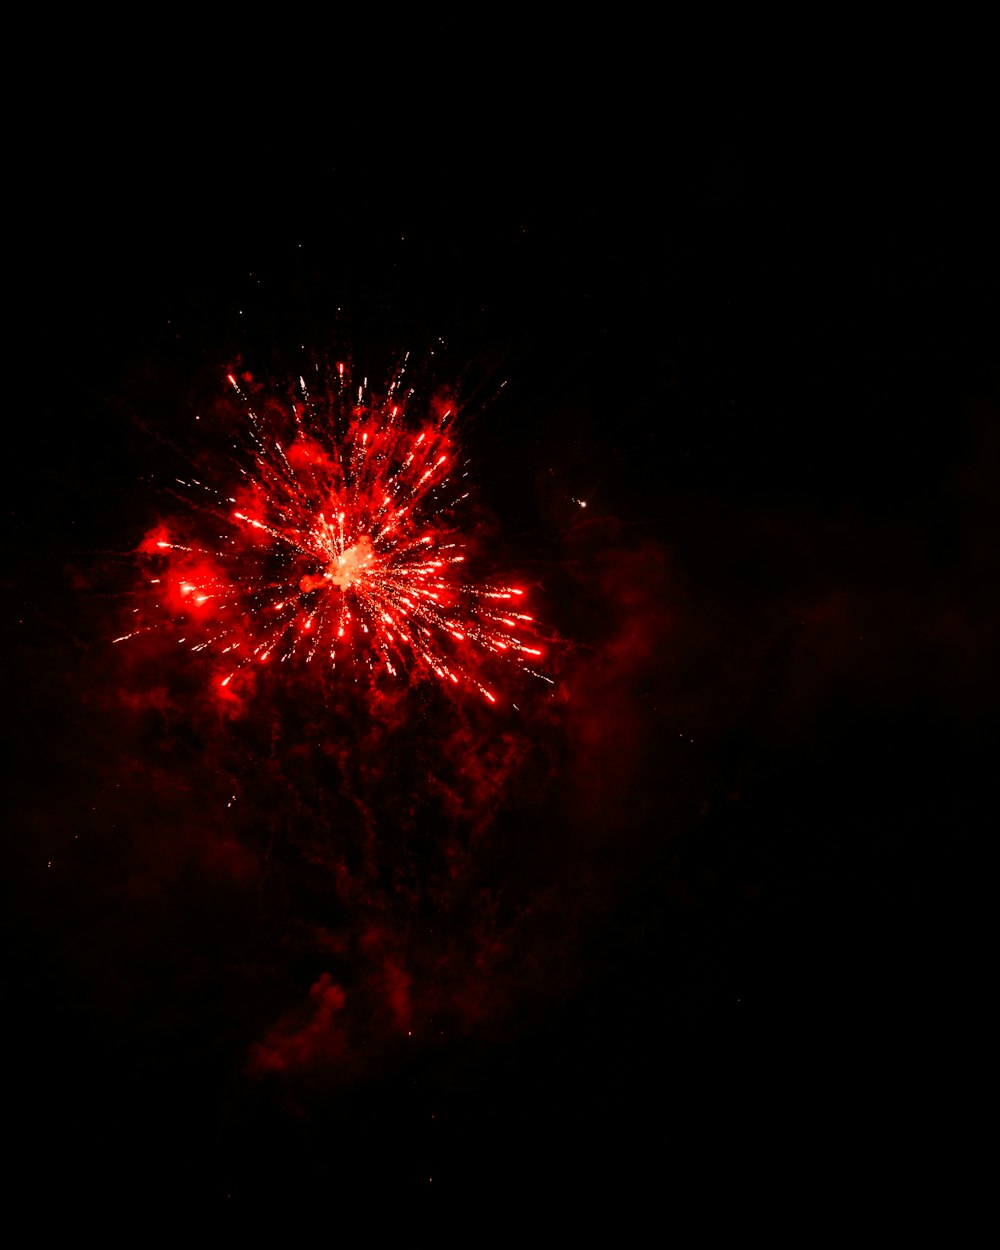 red fireworks in the sky during night time